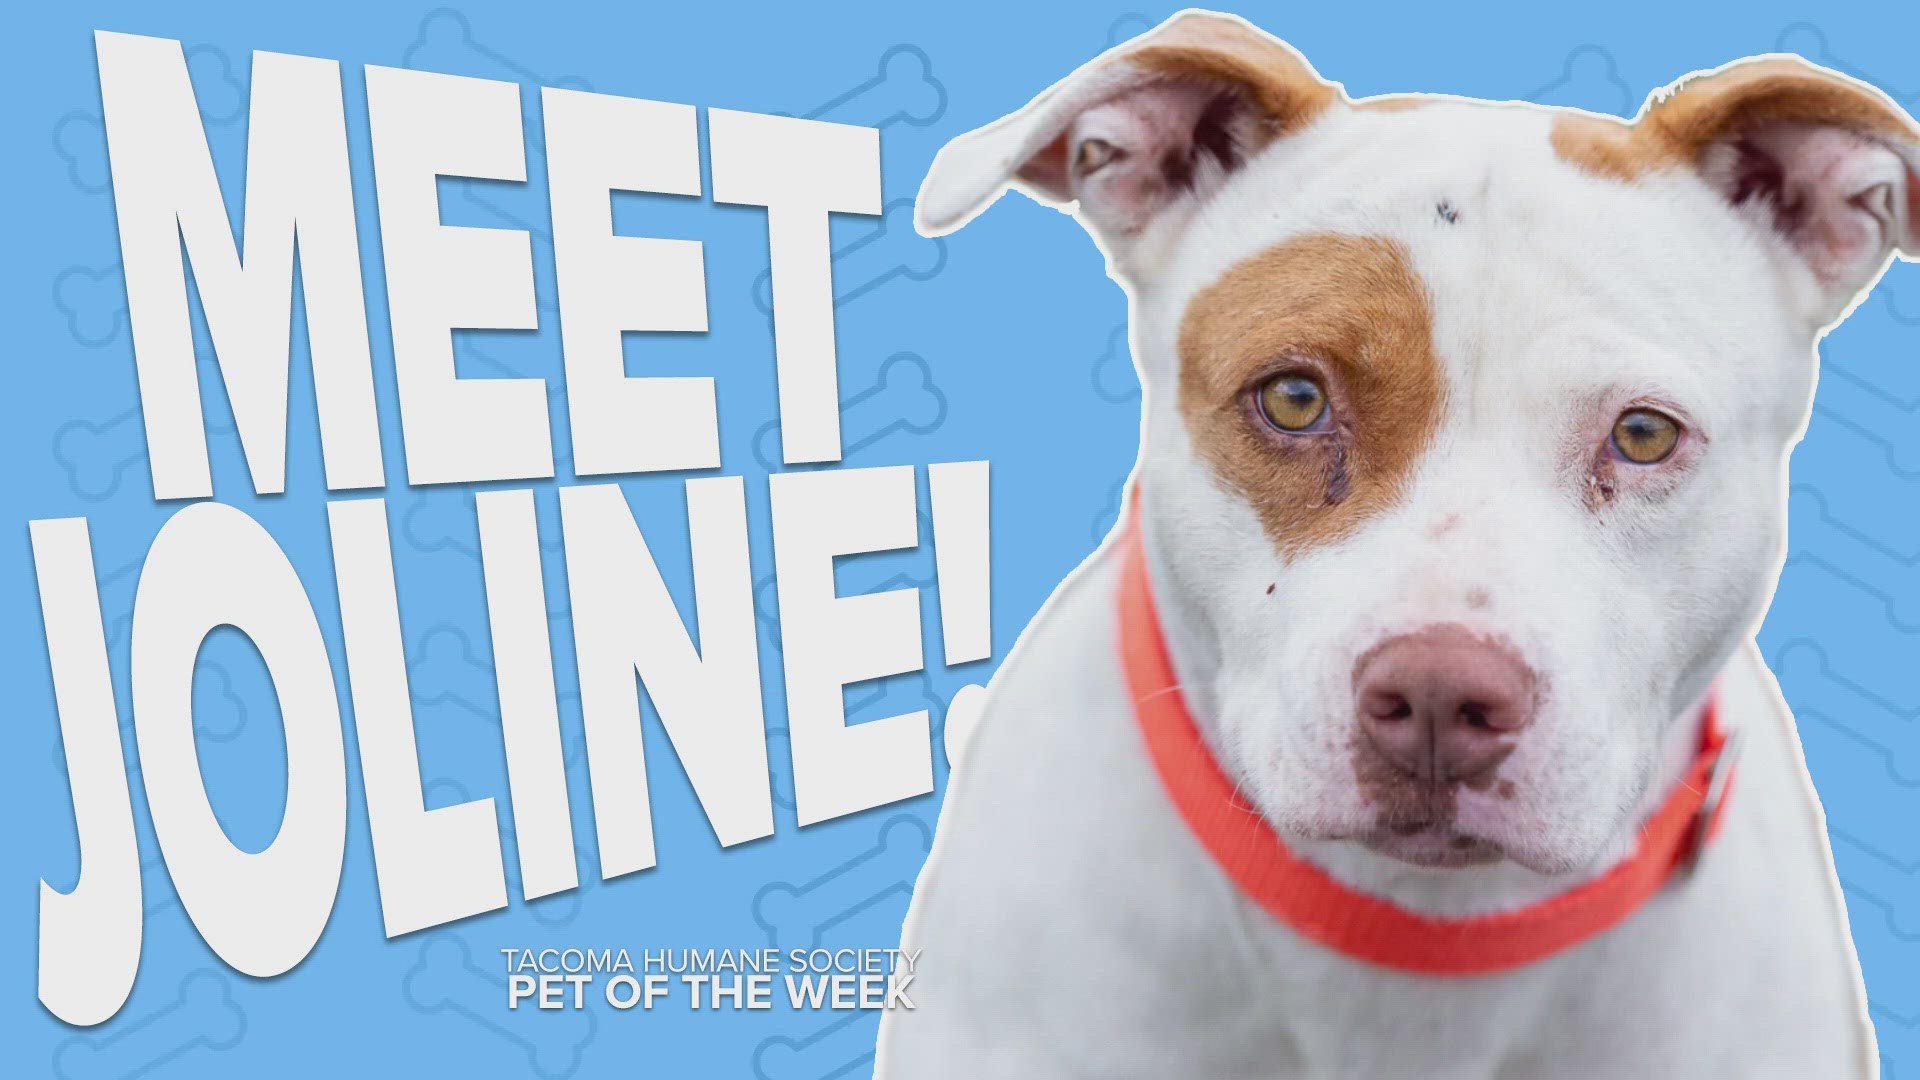 This week's featured adoptable pet is Joline!